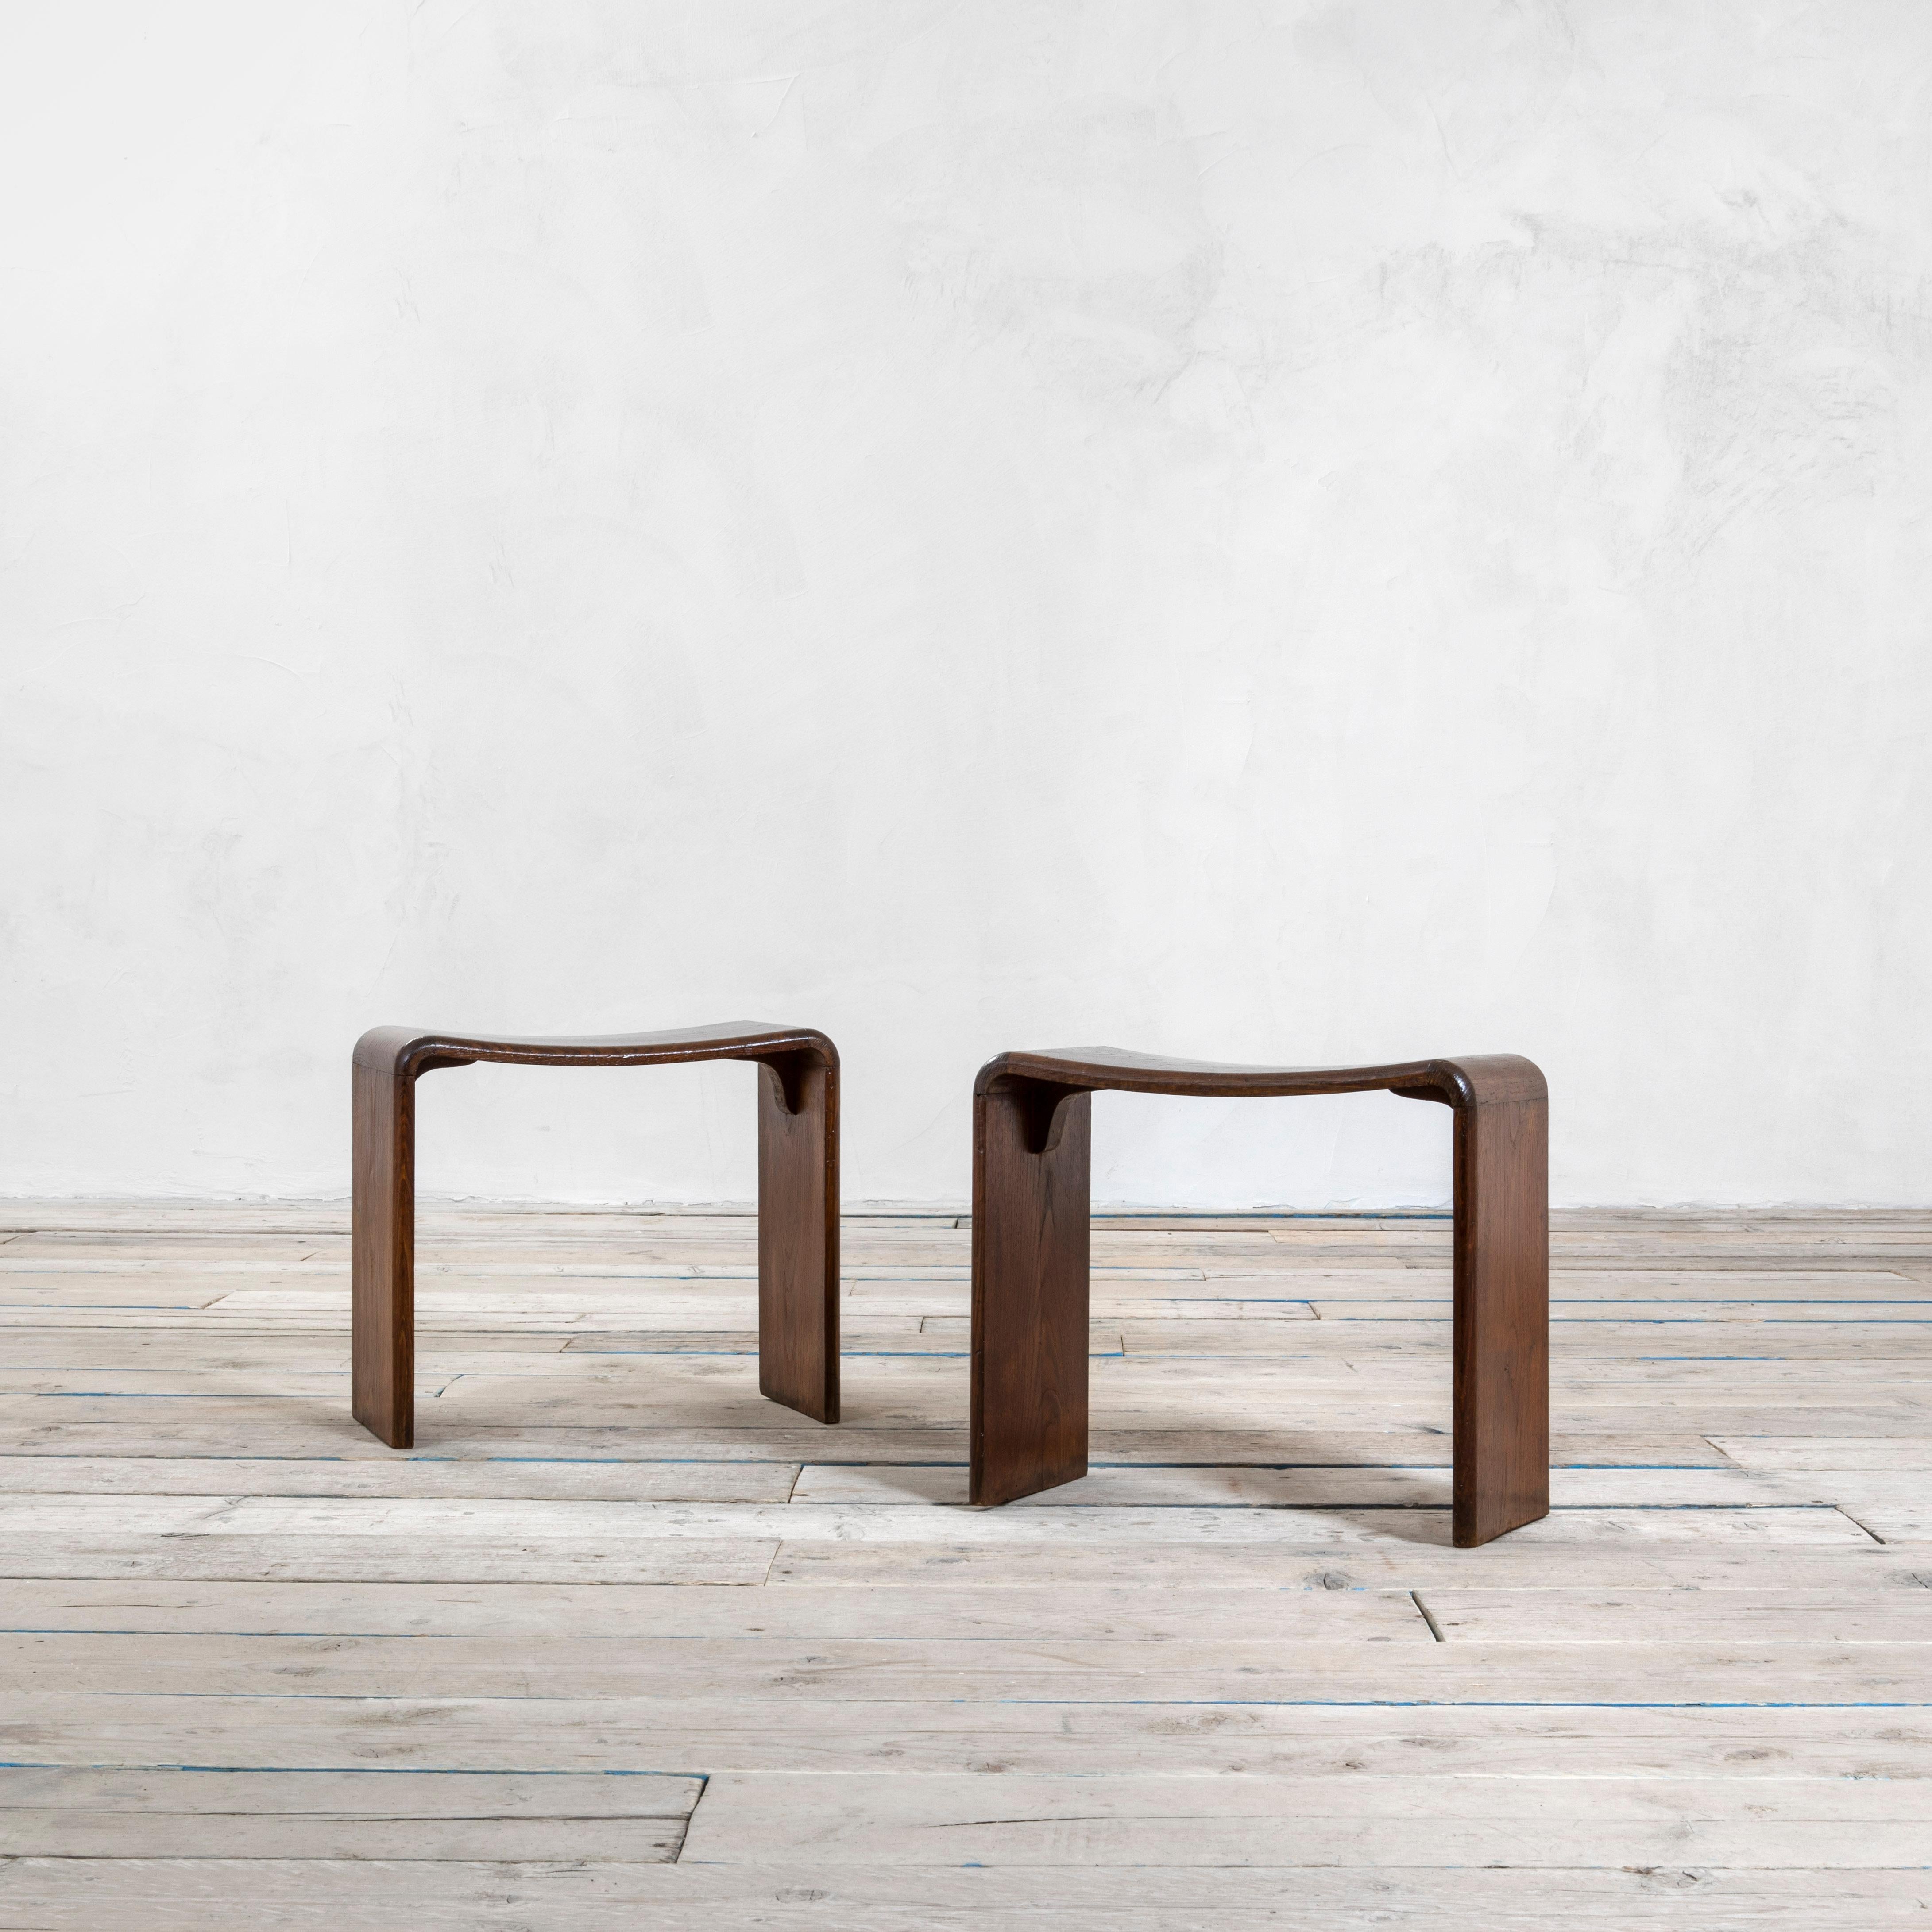 Set of two Stools in the style of Guglielmo Ulrich designed in '50s. They could be meant also as feetstools or general seatings. The two seats are completely in wood and have a special curved shape. 
Good condition, patina of time.
 